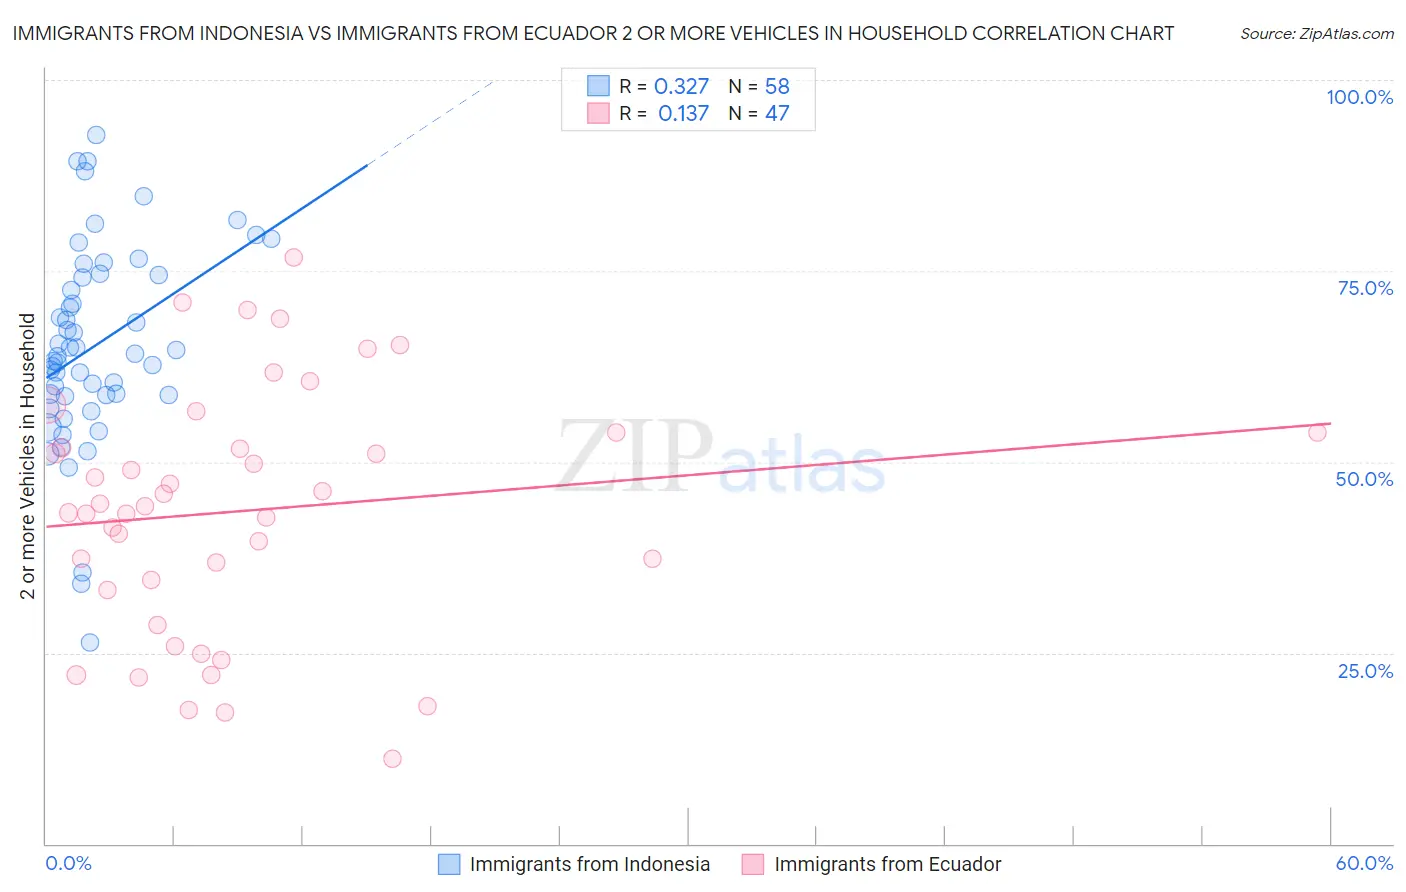 Immigrants from Indonesia vs Immigrants from Ecuador 2 or more Vehicles in Household